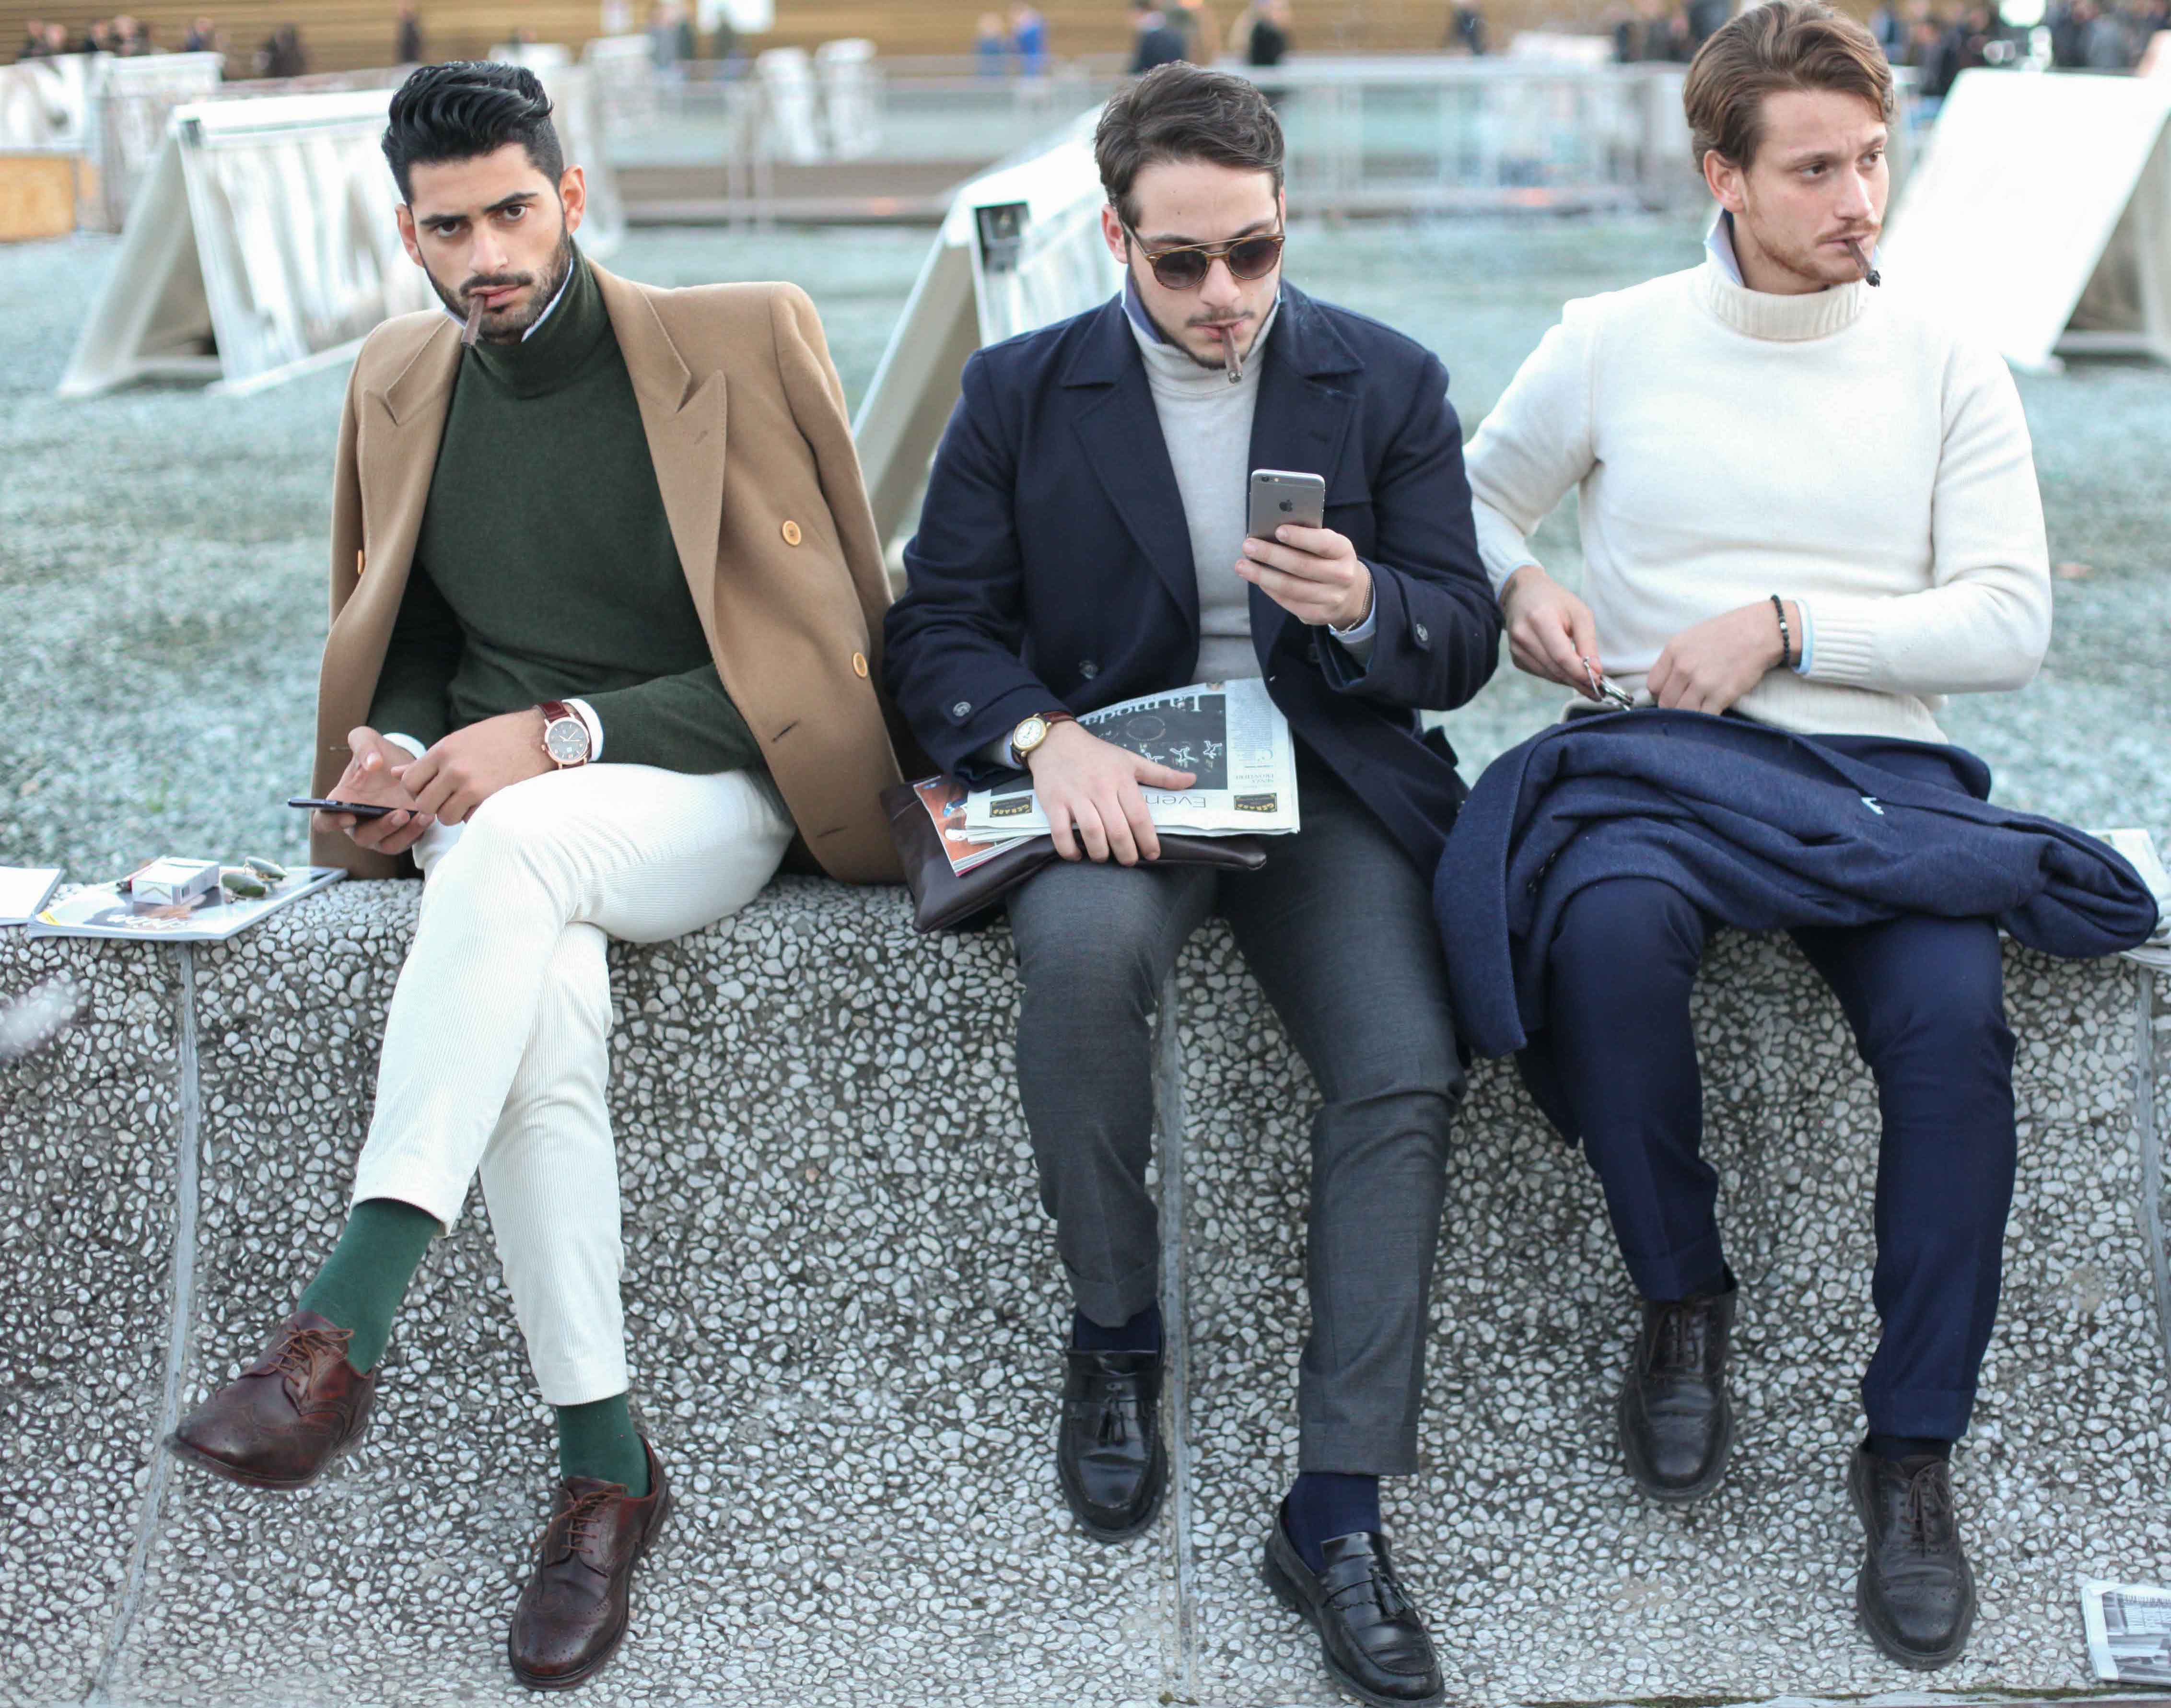 In Style We Trust: Pitti Uomo 89 Finest Street Style | HuffPost